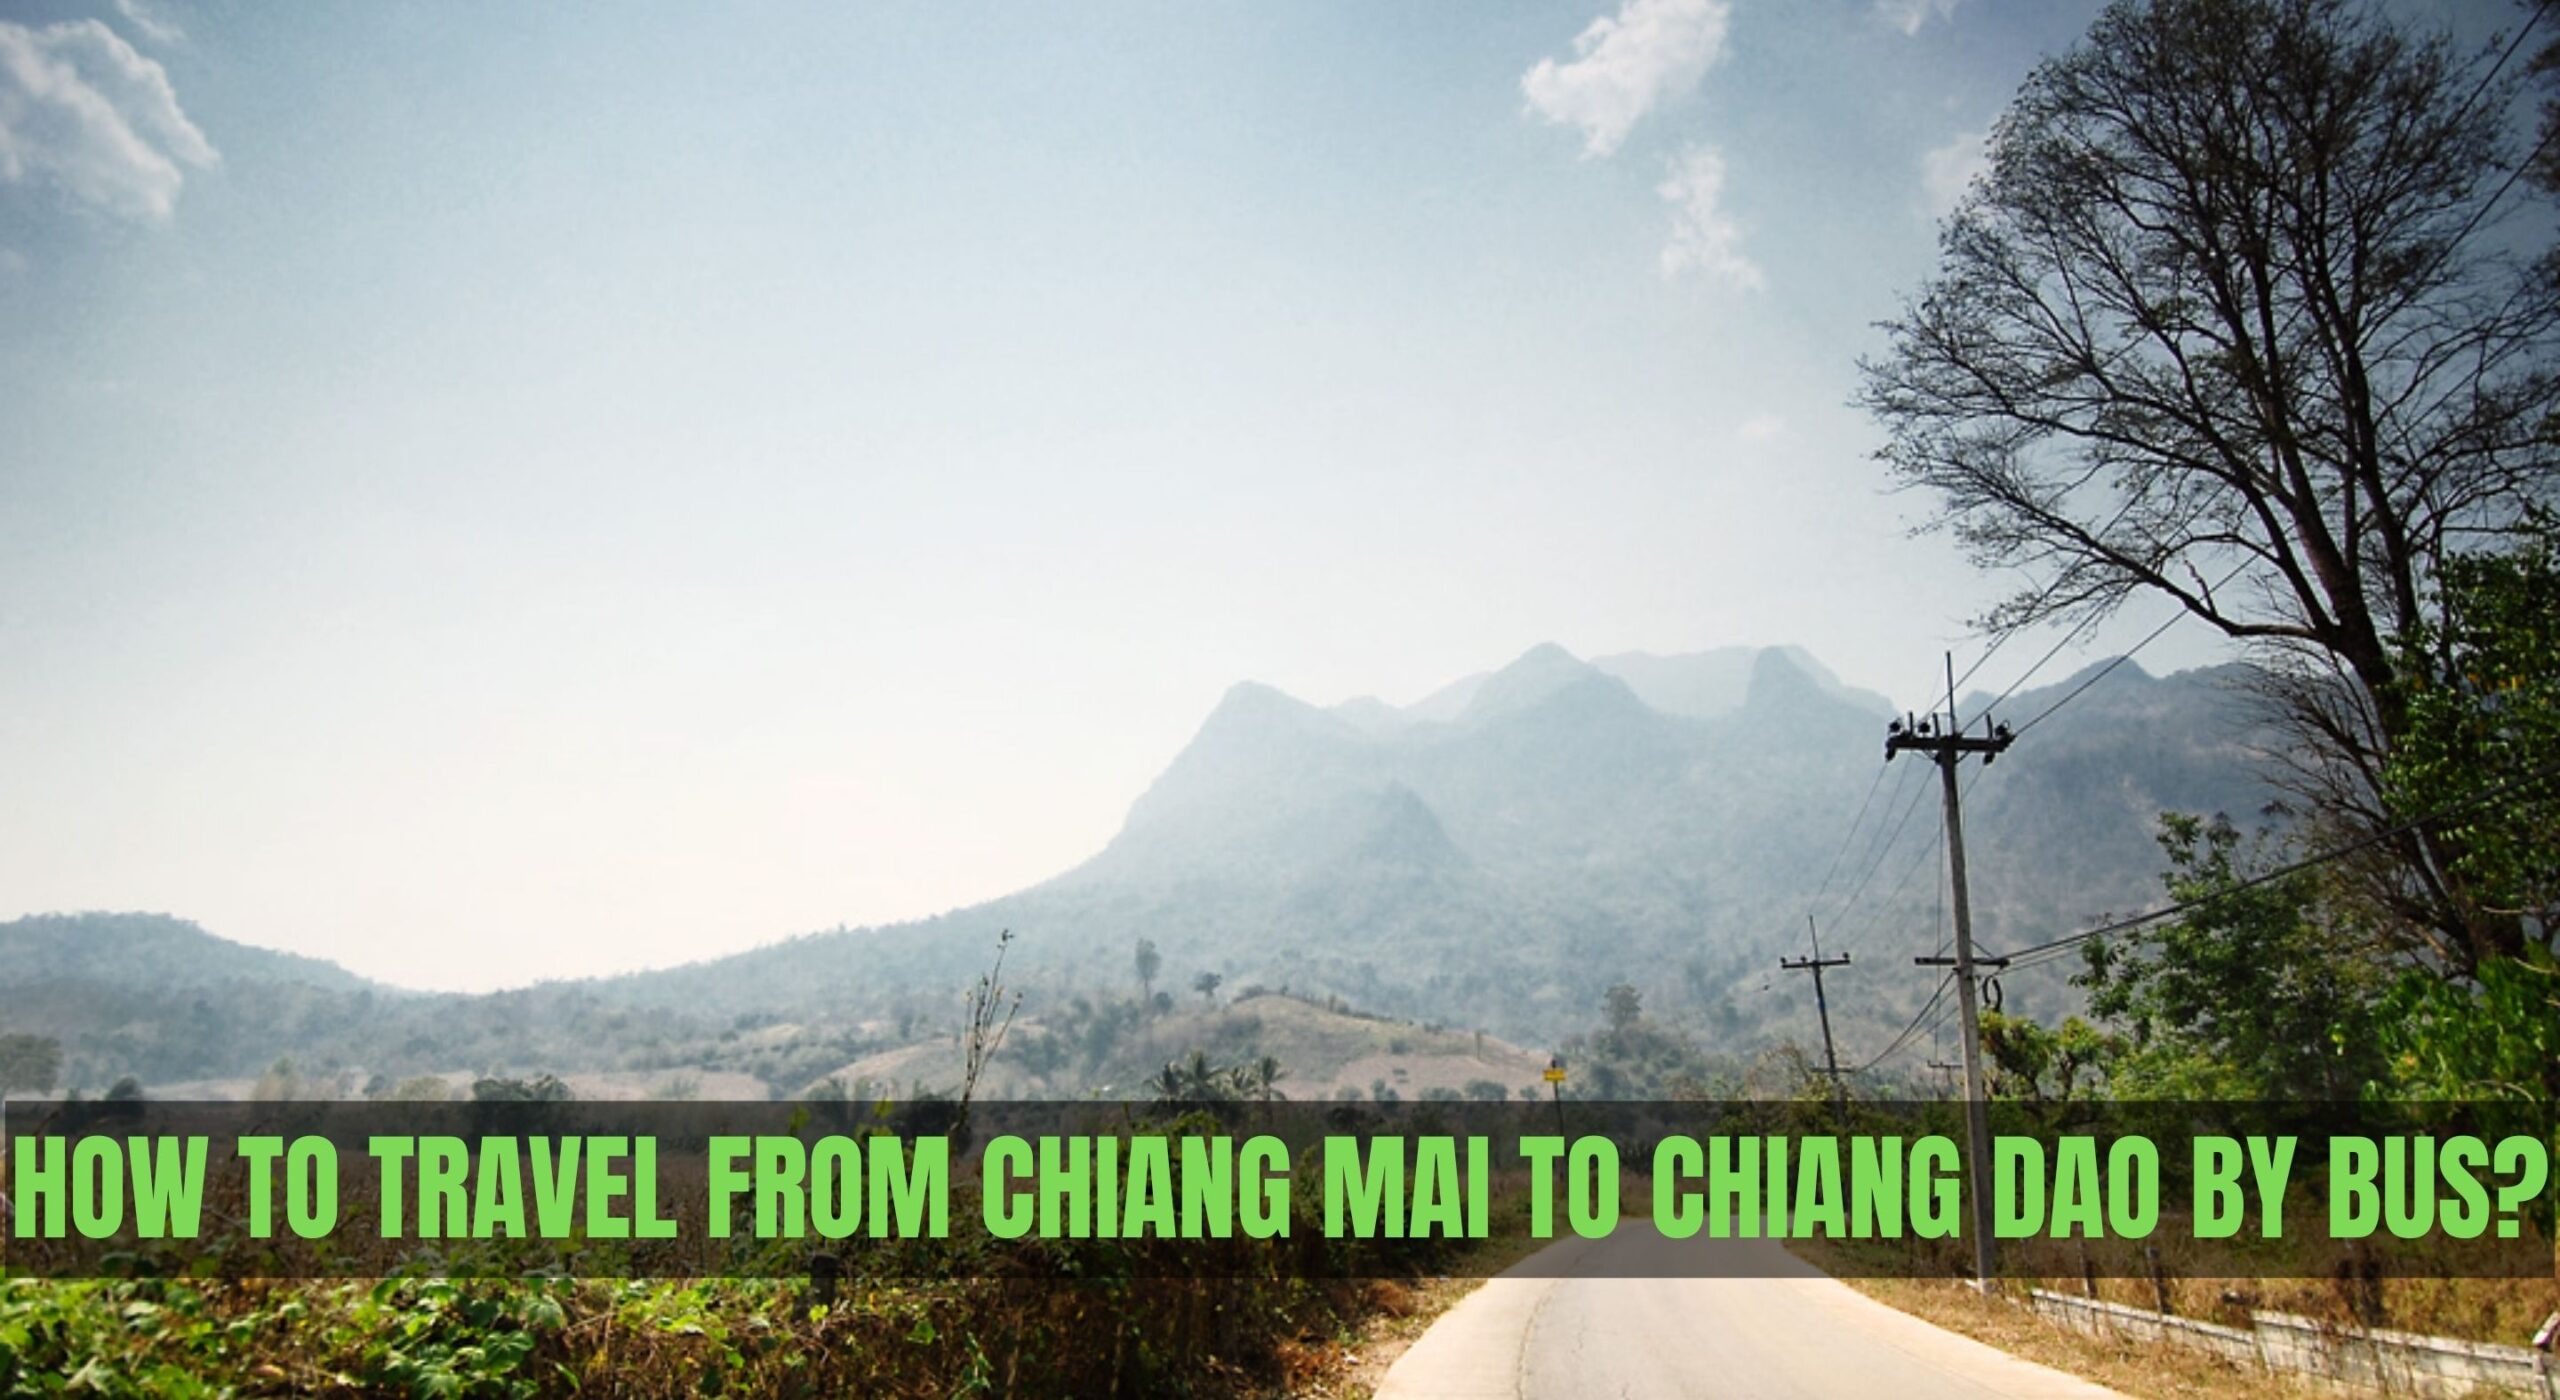 How To Travel From Chiang Mai To Chiang Dao By Bus?